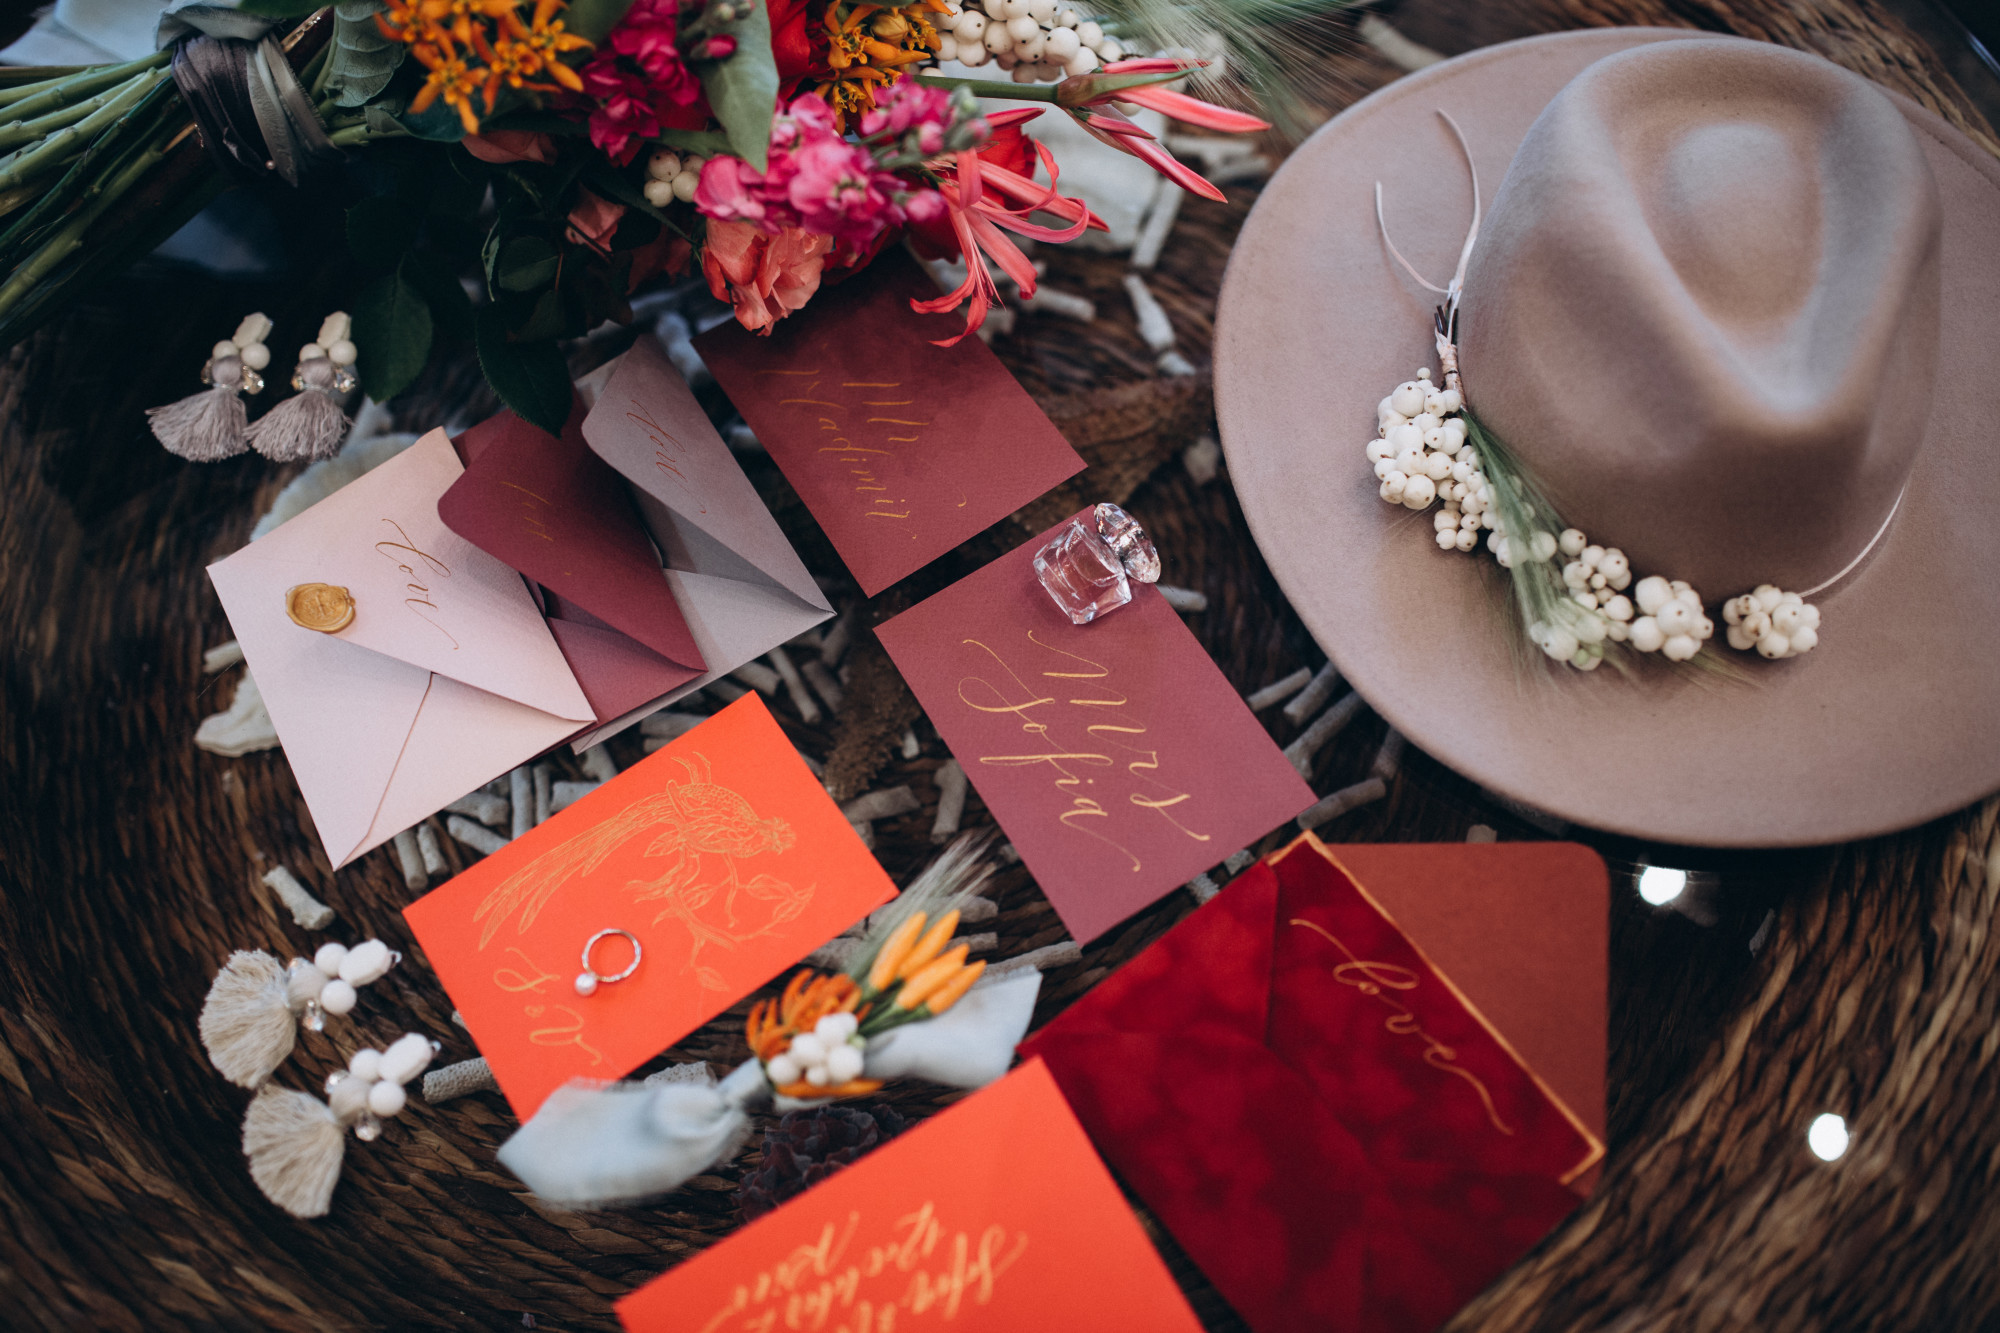 Wedding invitations are an essential part of wedding planning. This guide teaches you traditional wedding invitation etiquette rules that you should know.